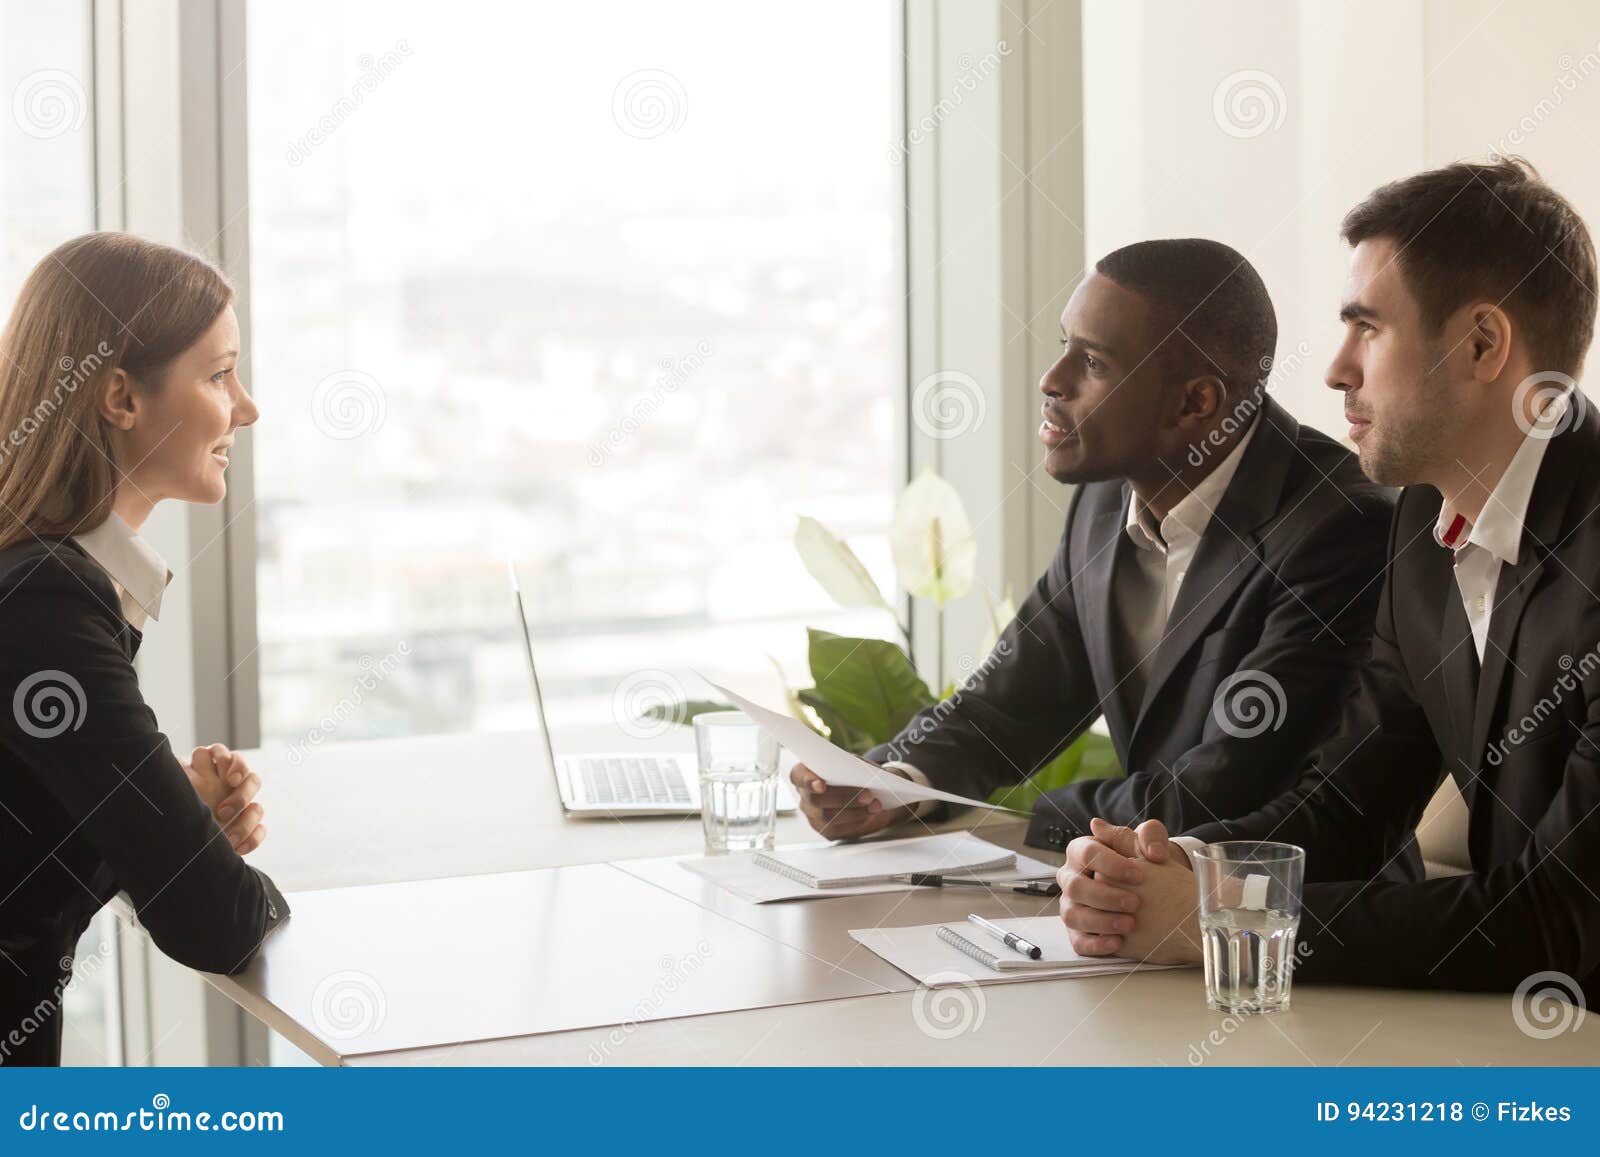 female applicant and multiracial recruiters during job interview